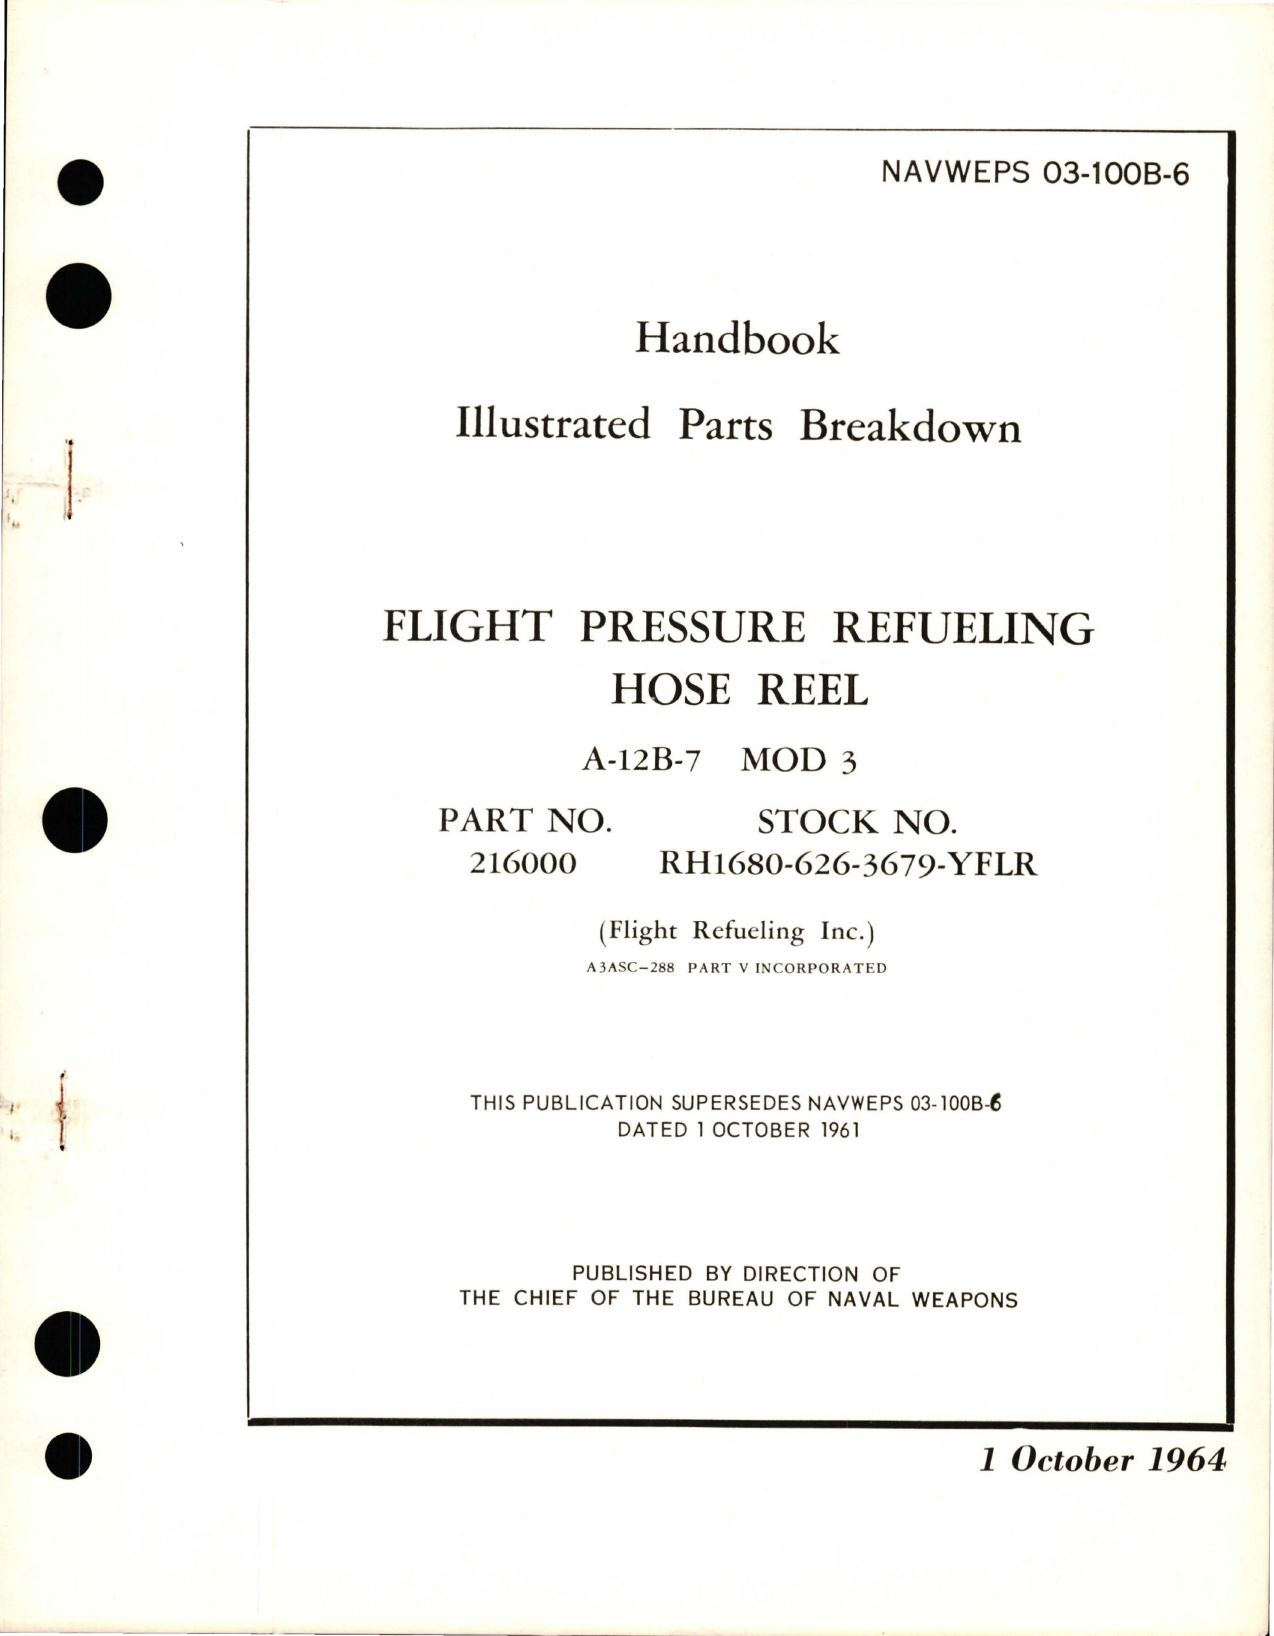 Sample page 1 from AirCorps Library document: Illustrated Parts Breakdown for Flight Pressure Refueling Hose Reel A-12B-7 - MOD 3 - Part 216000 